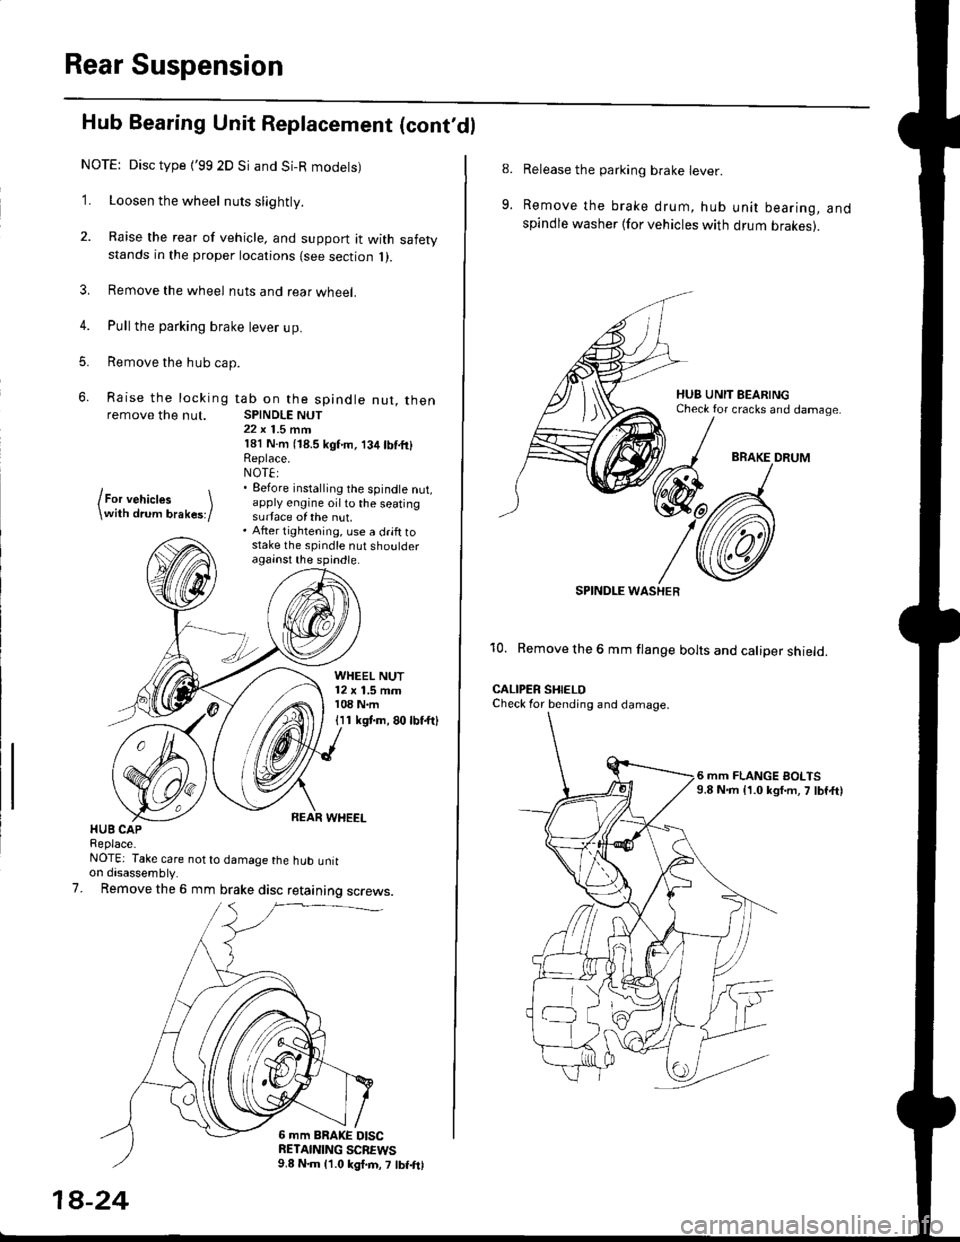 HONDA CIVIC 1996 6.G User Guide Rear Suspension
Hub Bearing Unit Replacement (contdl
NOTE: Disc type {99 2D Si and Si-R modets)
1. Loosen the wheel nuts slightly.
2. Raise the rear of vehicle, and support it with safetystands in t